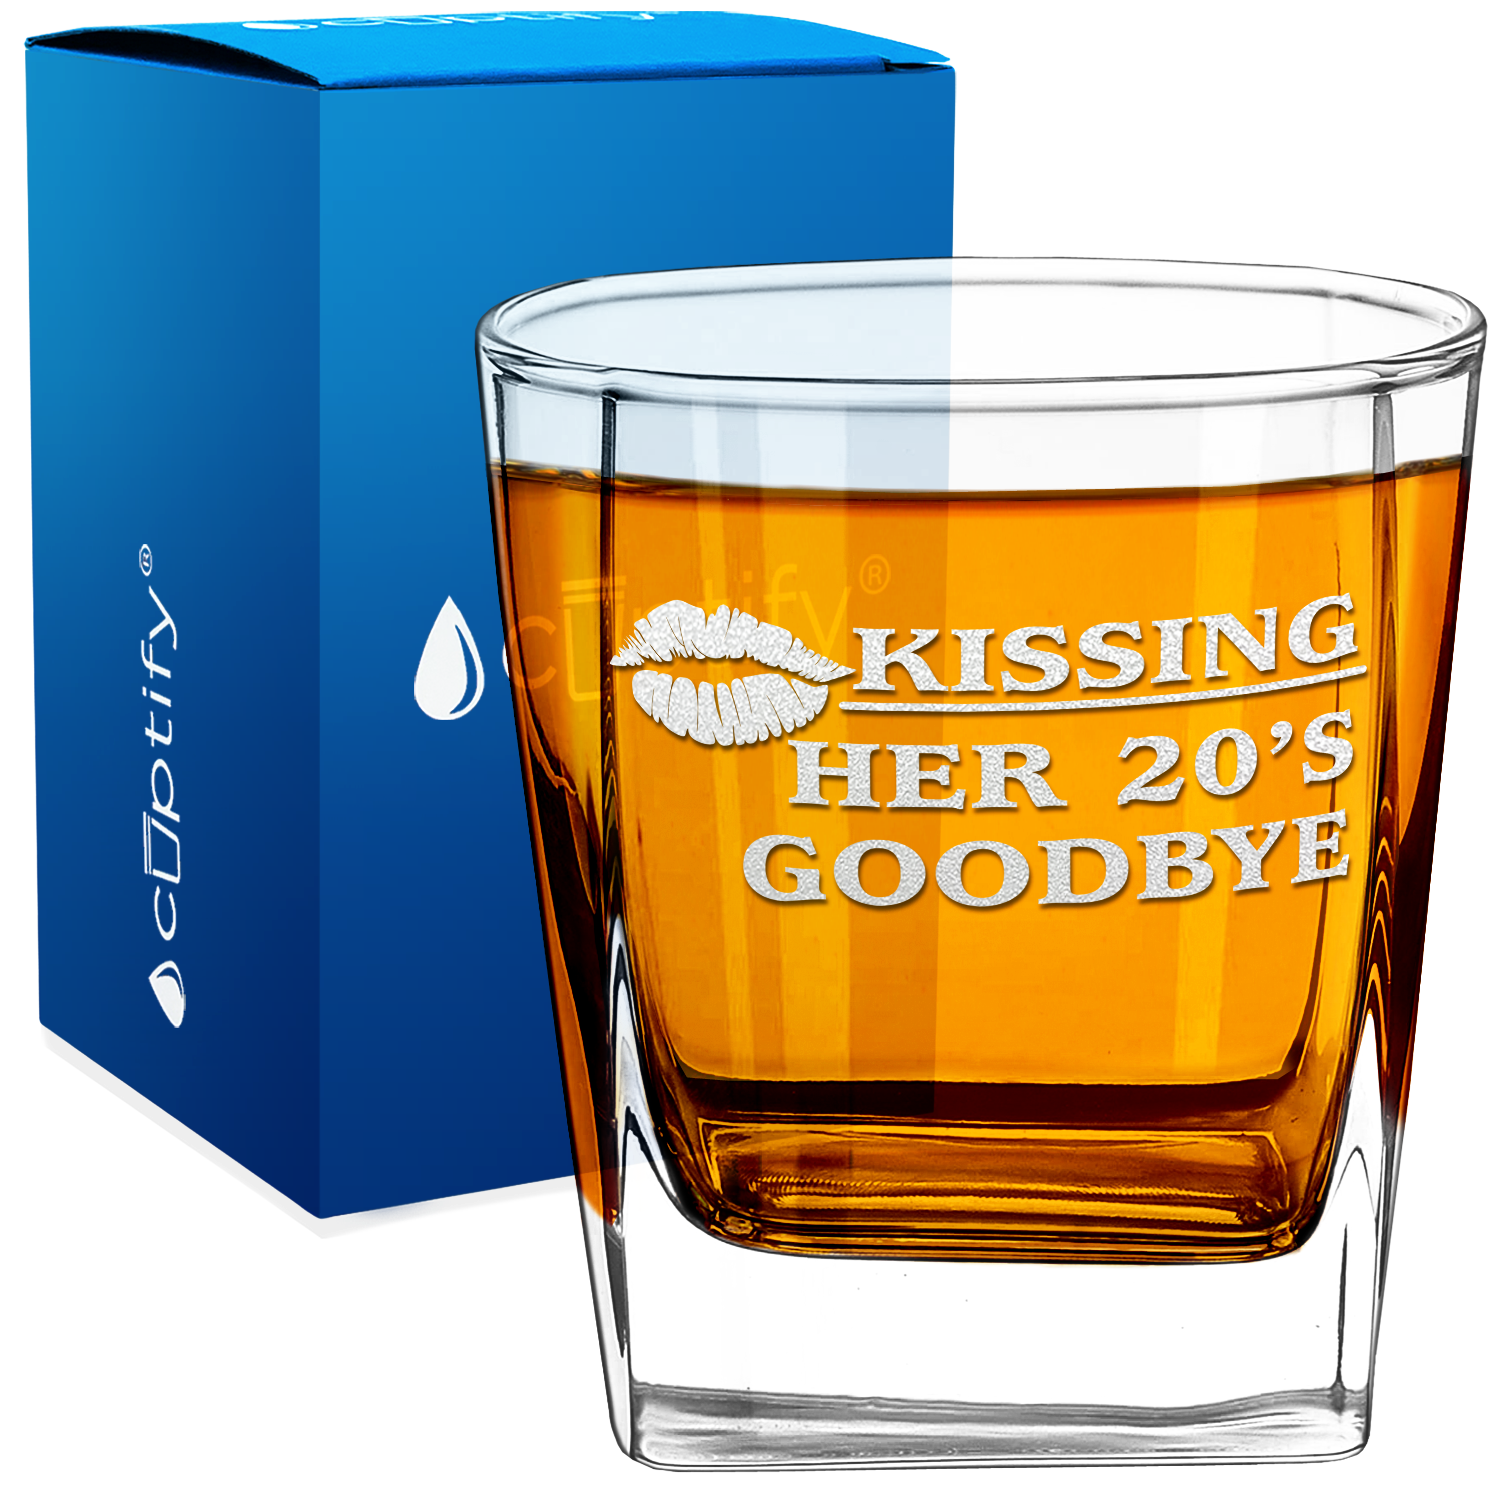 Kissing Her 20's Goodbye 12oz Double Old Fashioned Glass